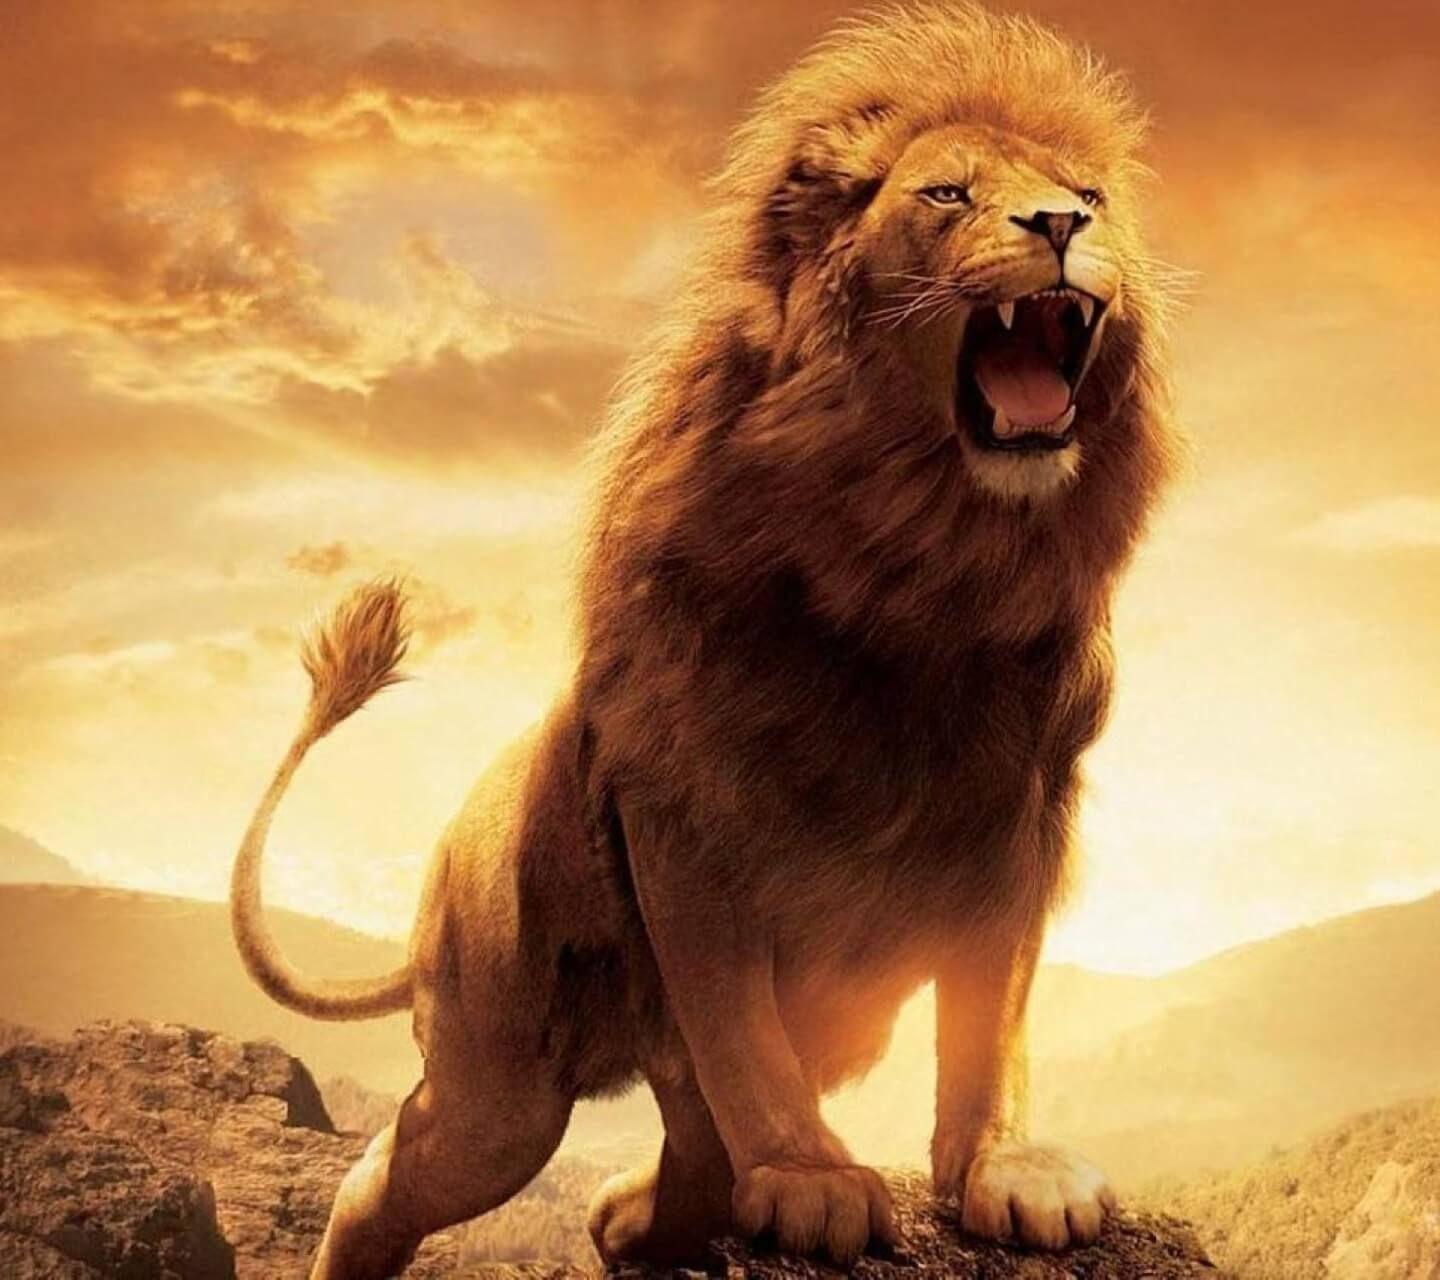 The lion in the picture Wallpaper